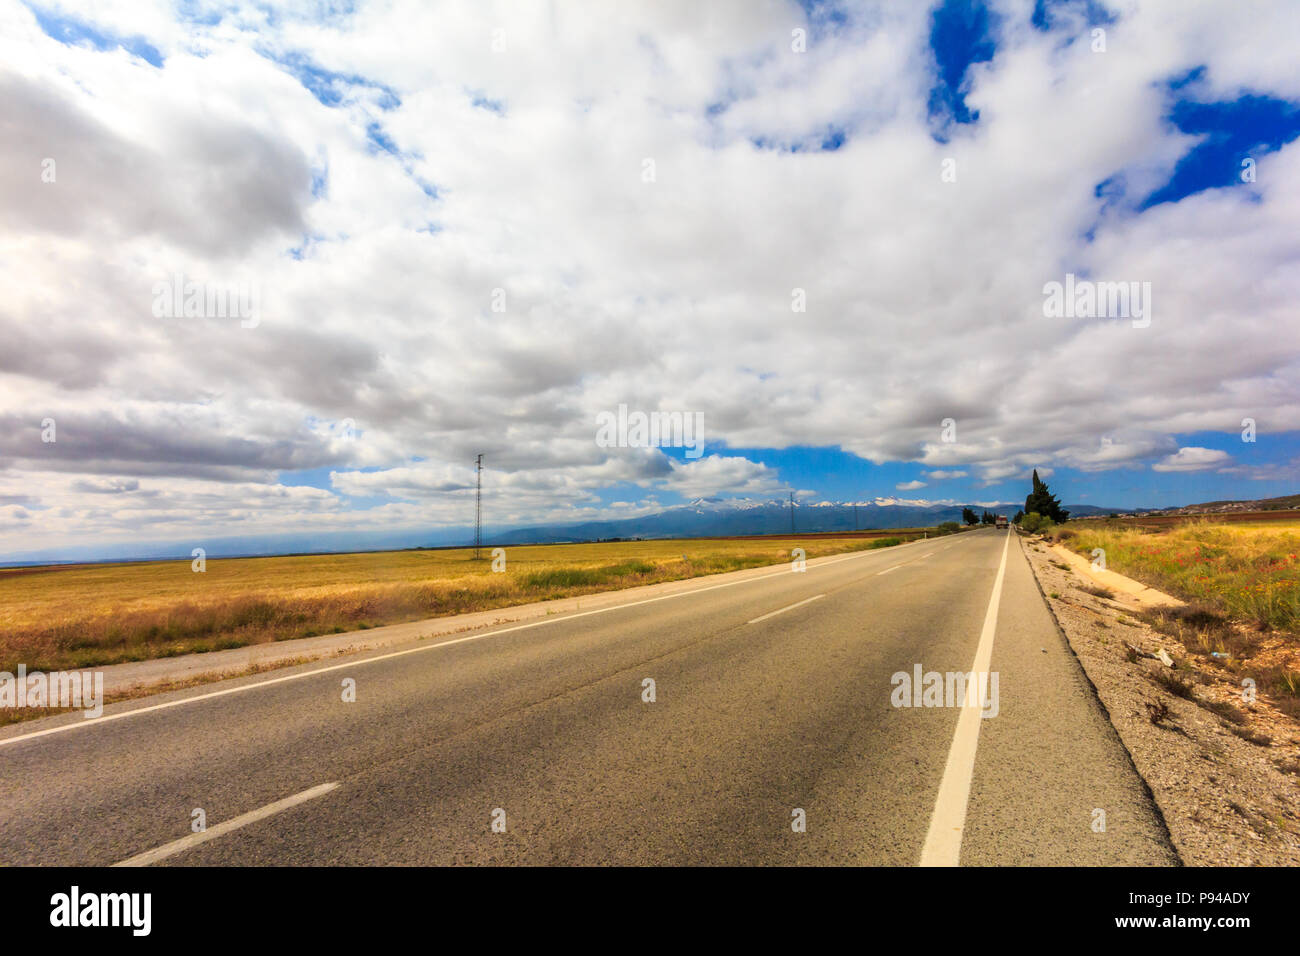 Landscape of road through golden fields with clouds, Granada Province, Spain Stock Photo